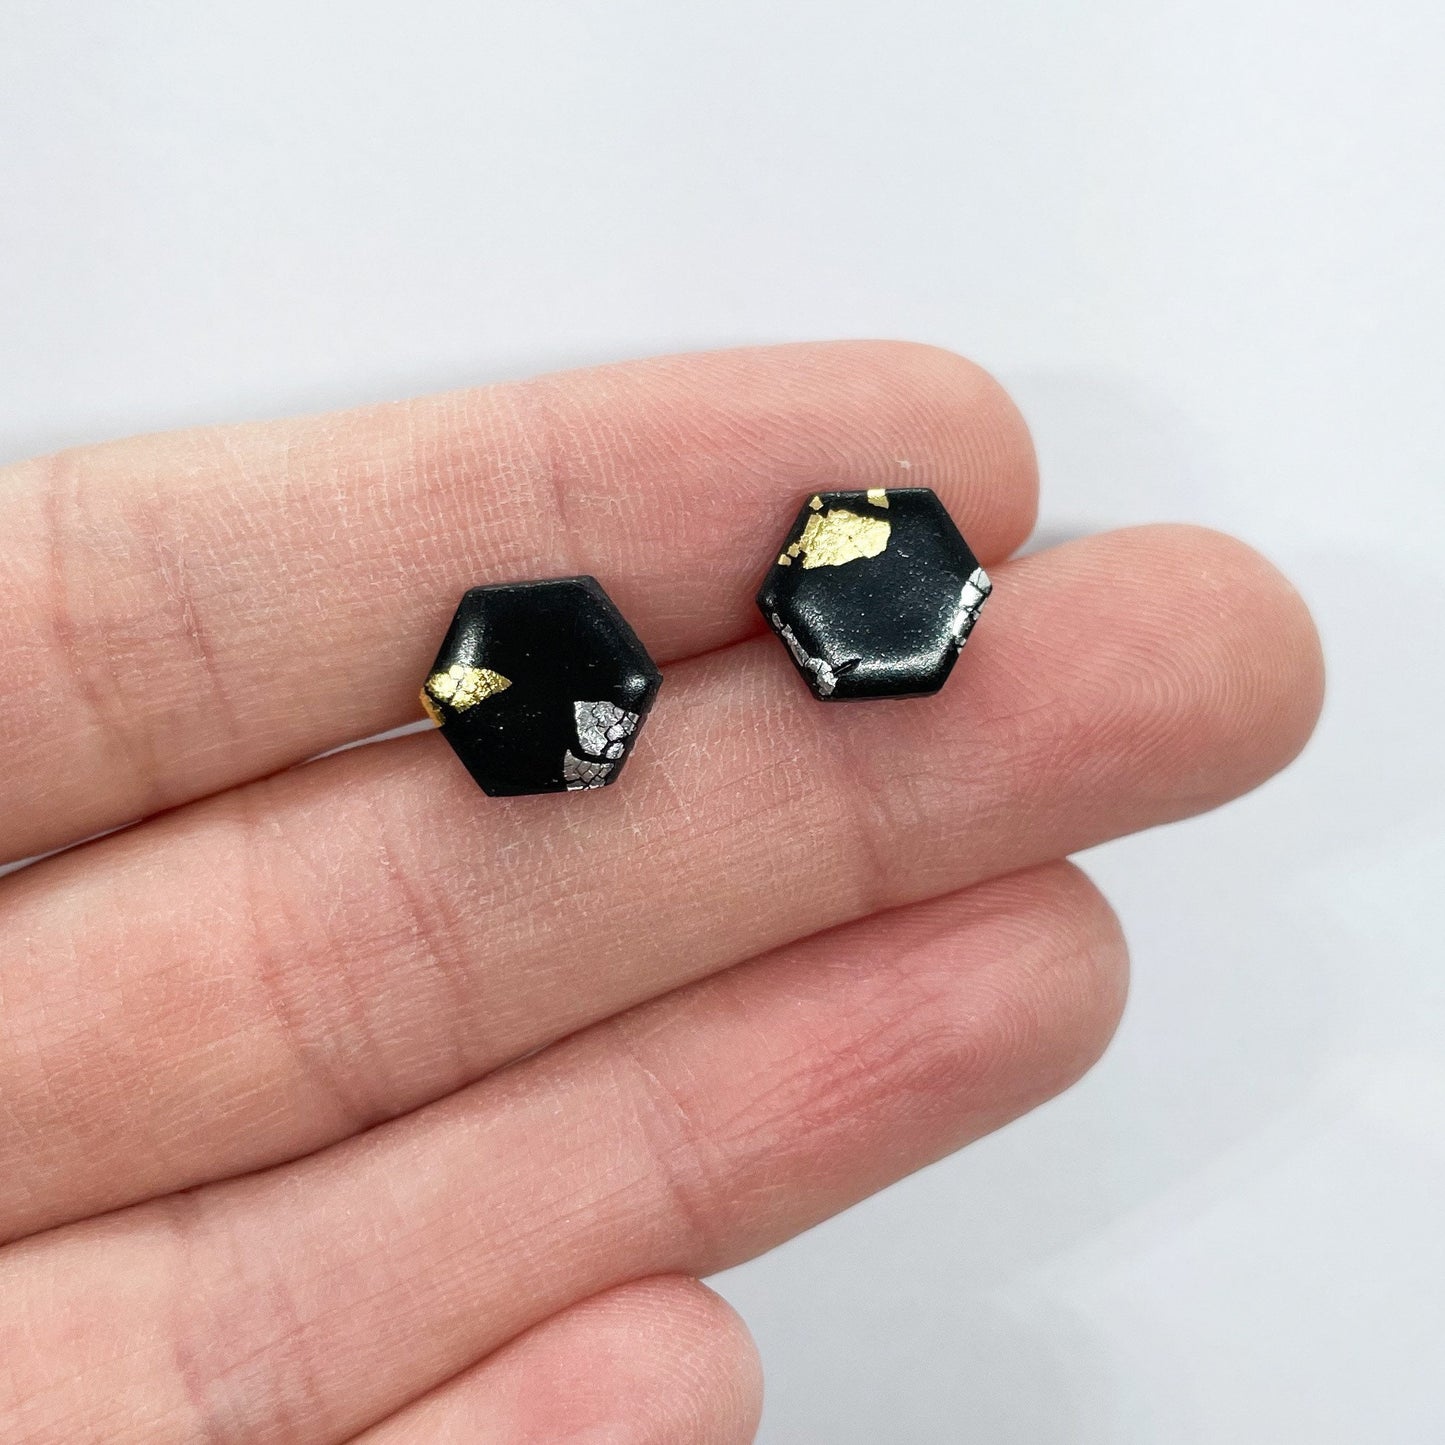 Black and gold leaf polymer clay stud earrings, hexagonal studs, post box gift, birthday gift for her, female friend gift, girlfriend gift.